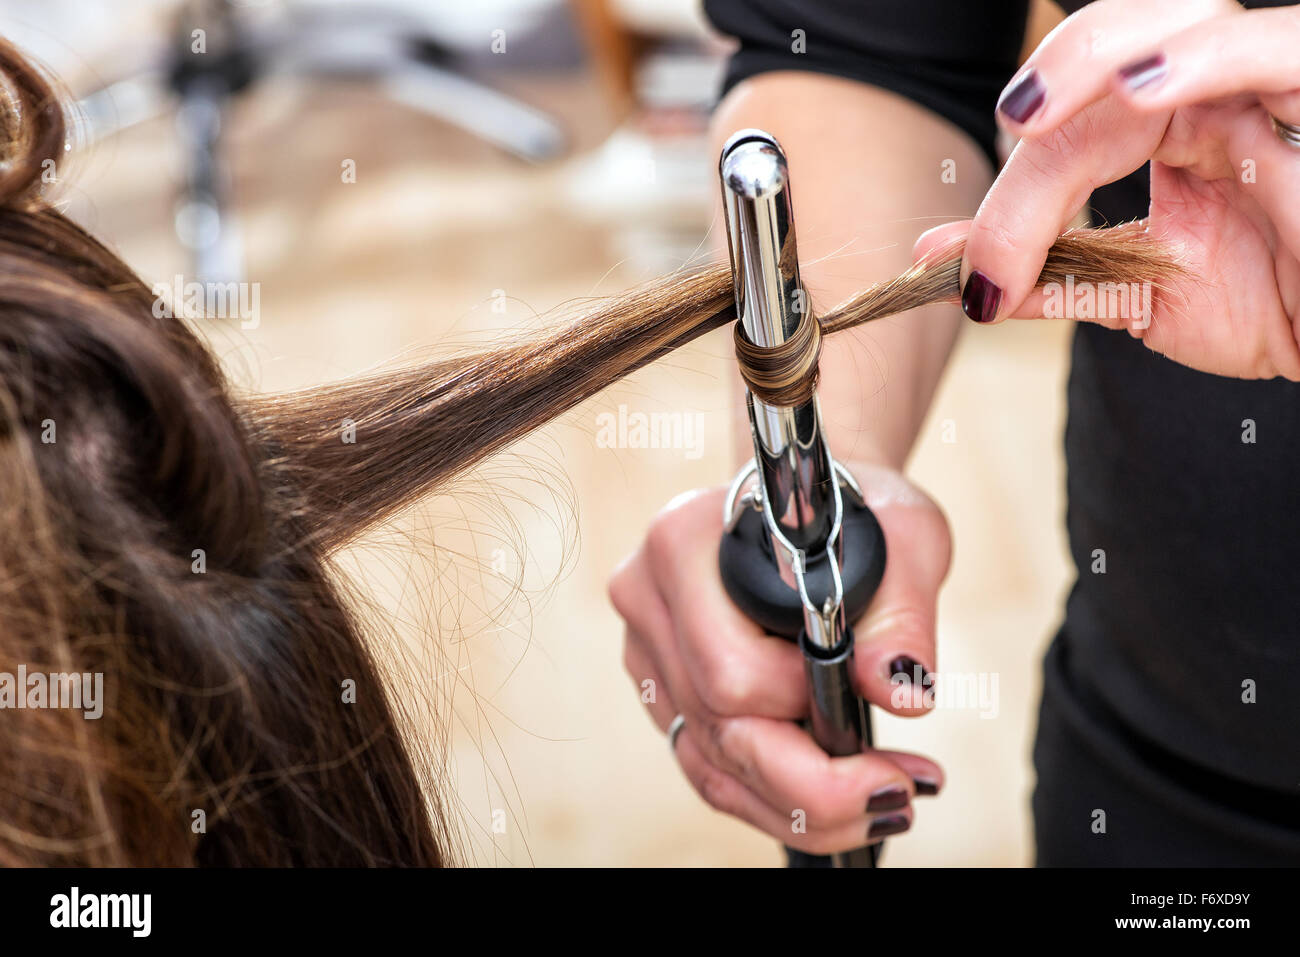 Hairstylist using a curling iron to firm ringlets, closeup view of the hand Stock Photo